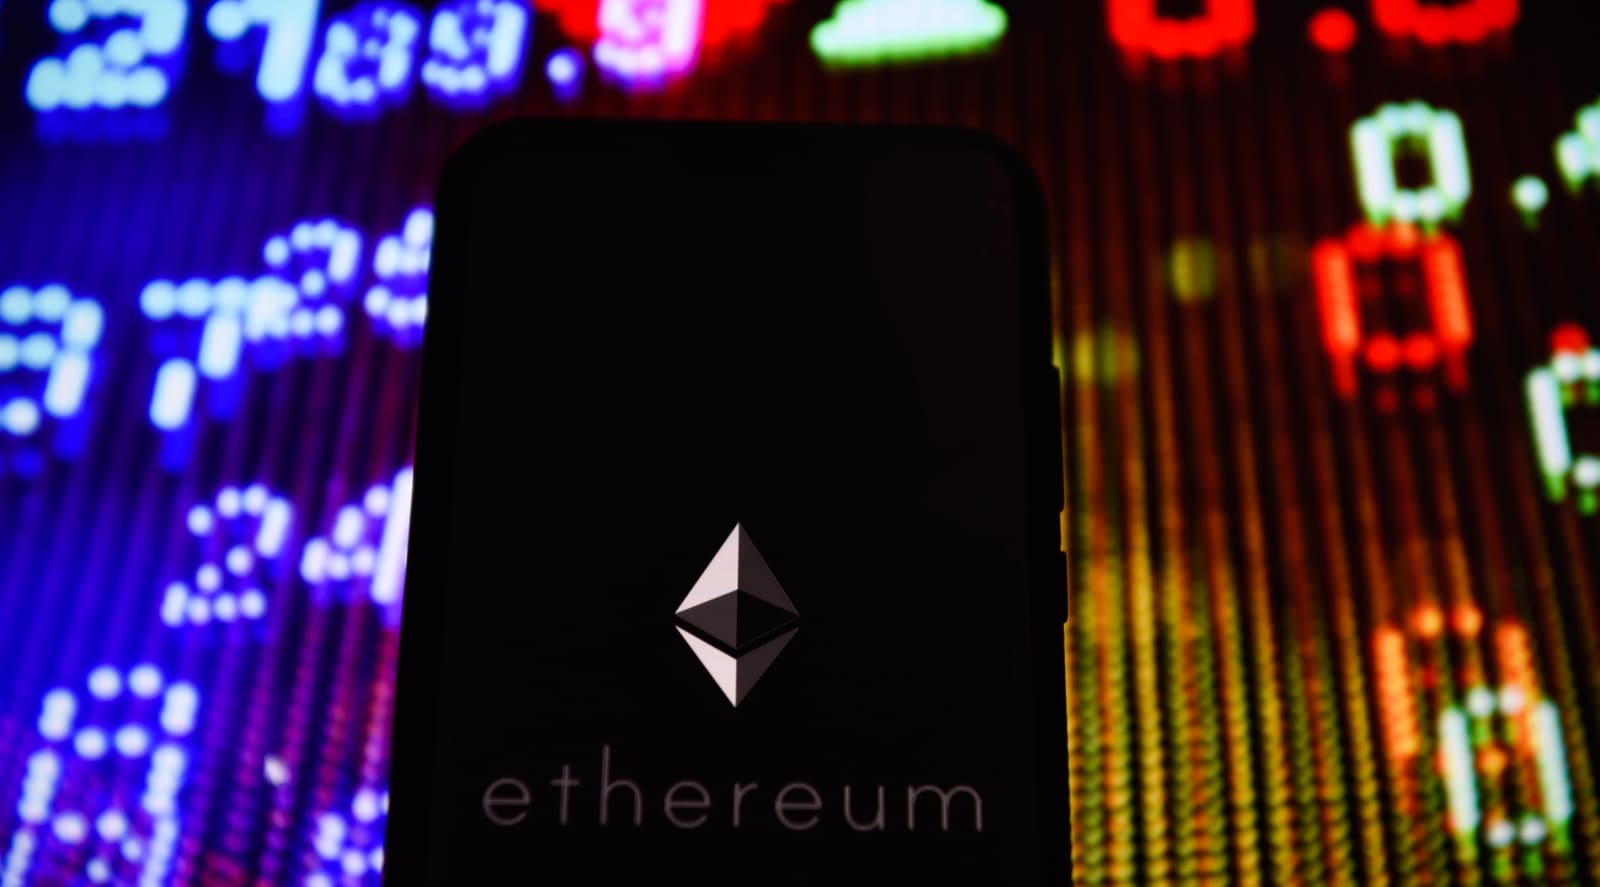 Crypto currency Ethereum  logo is seen on an android mobile